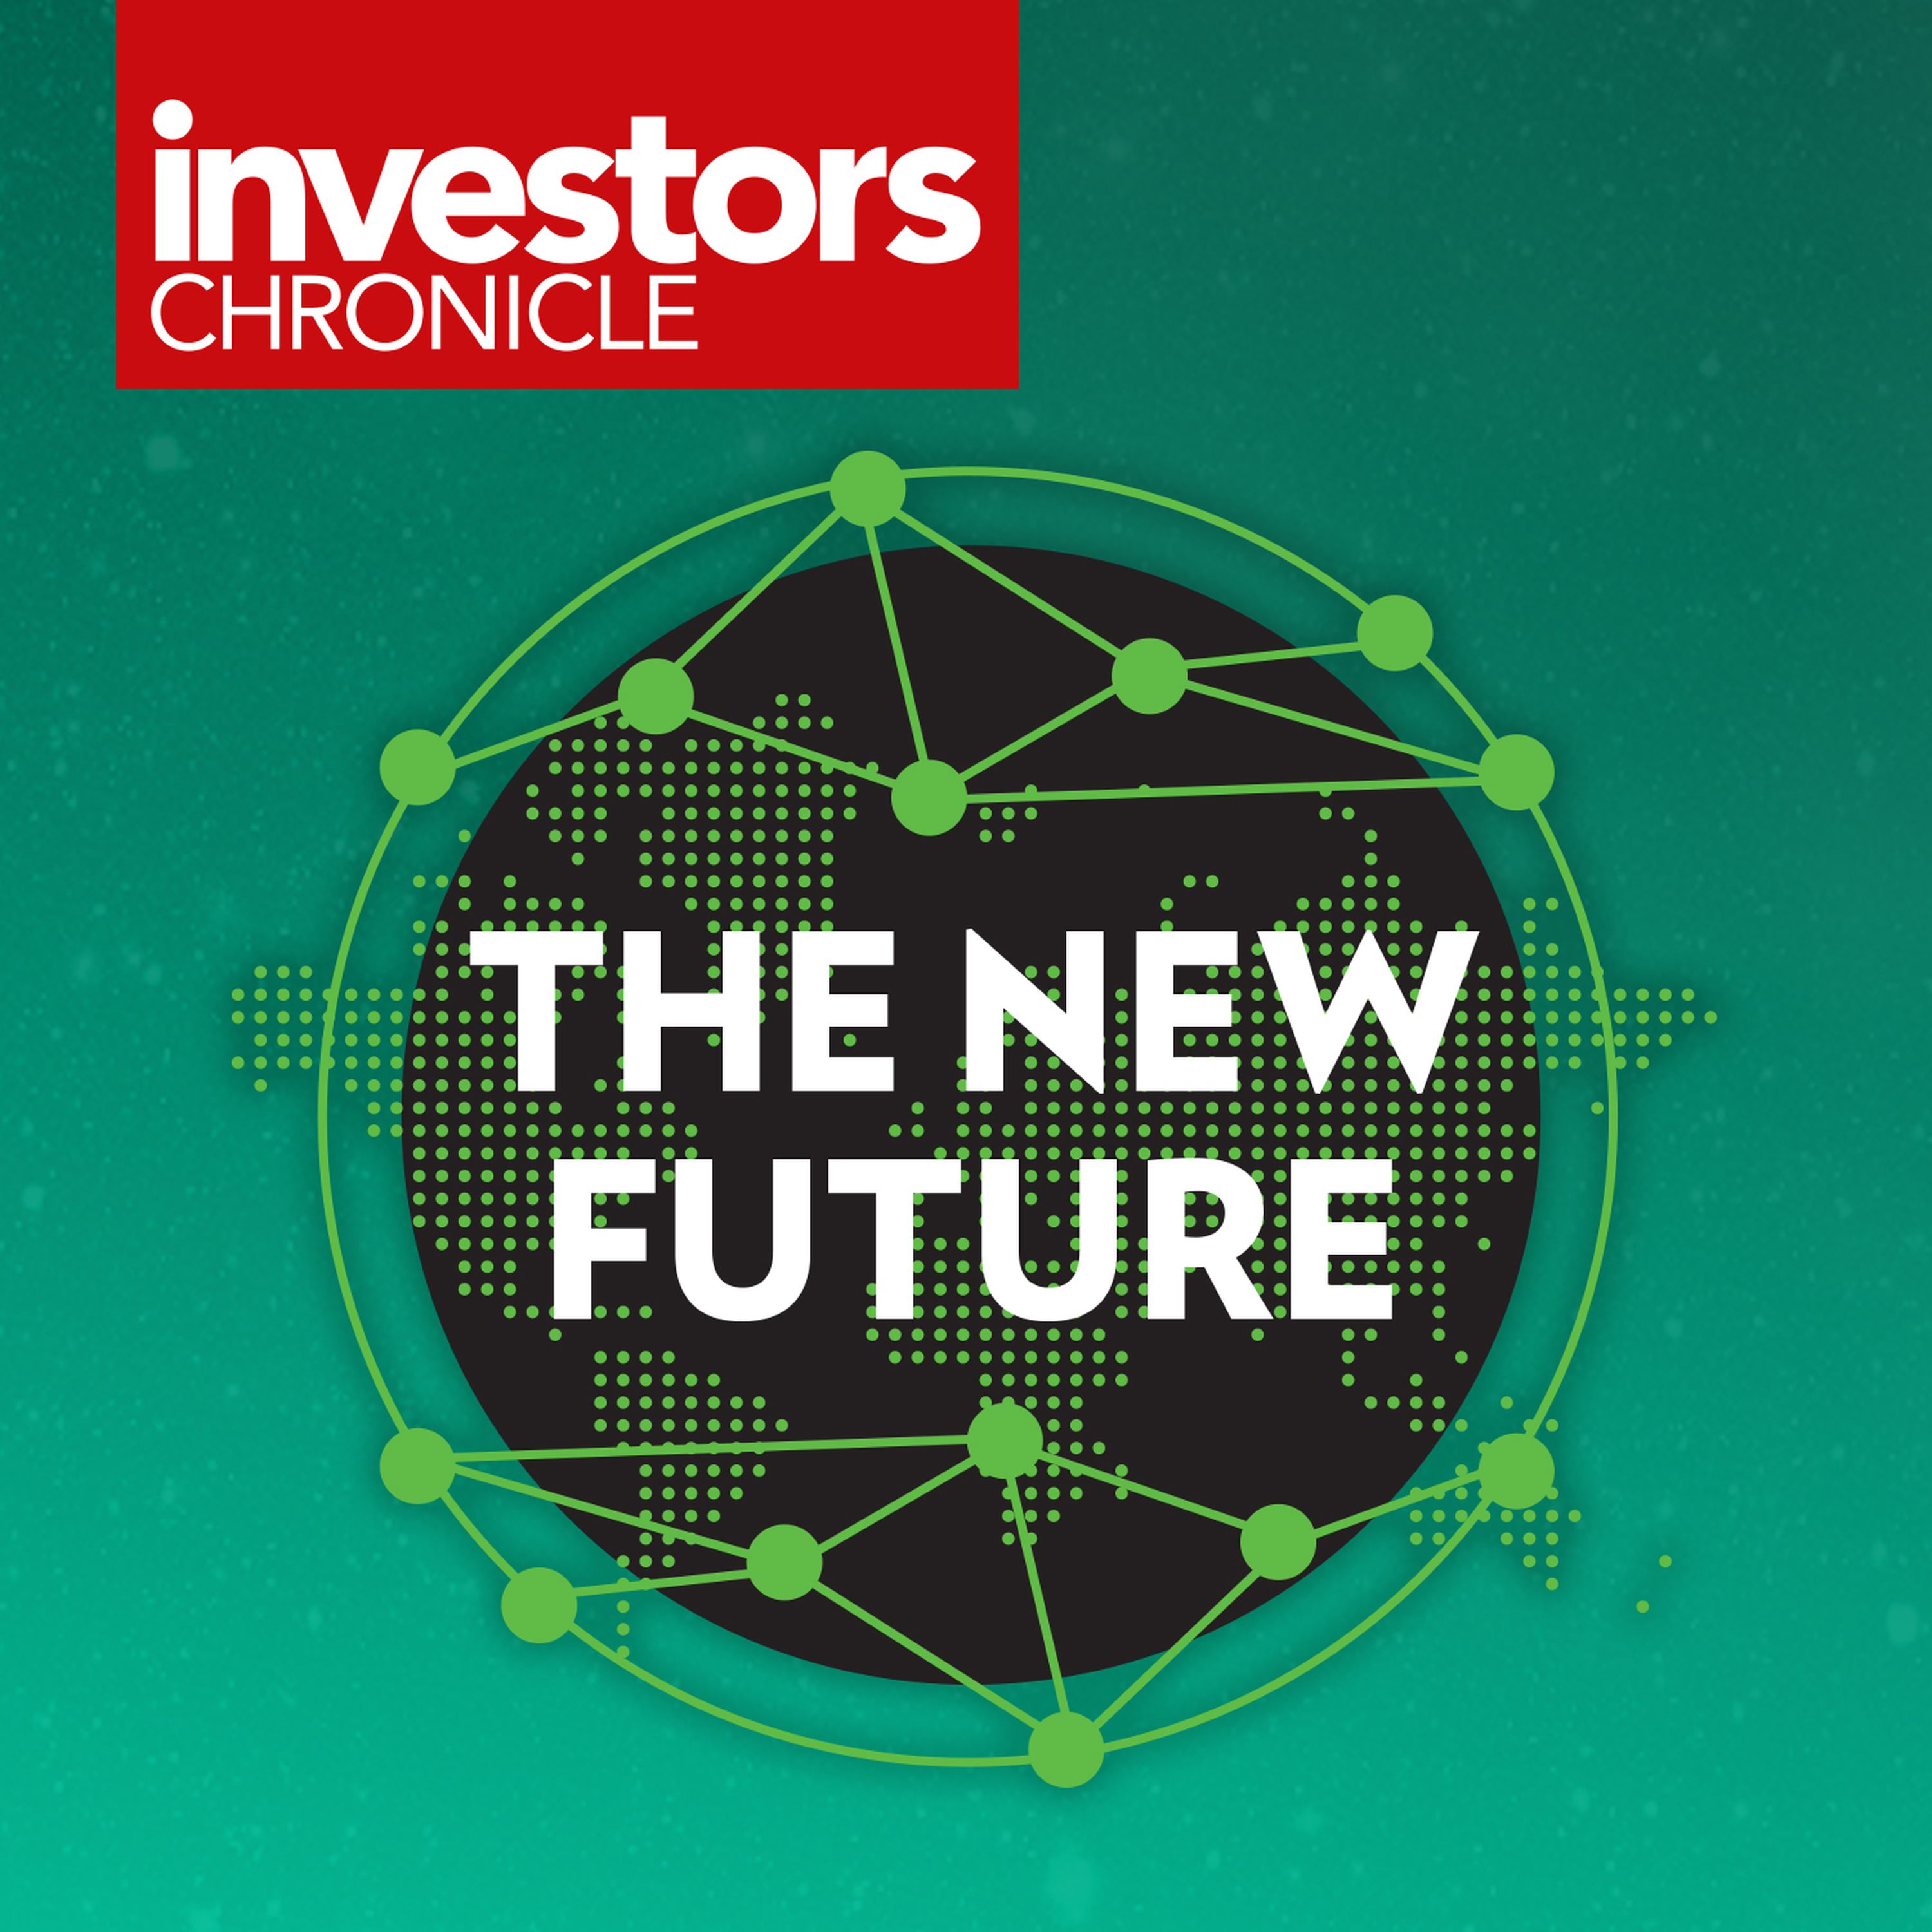 The Investment Hour: The new future